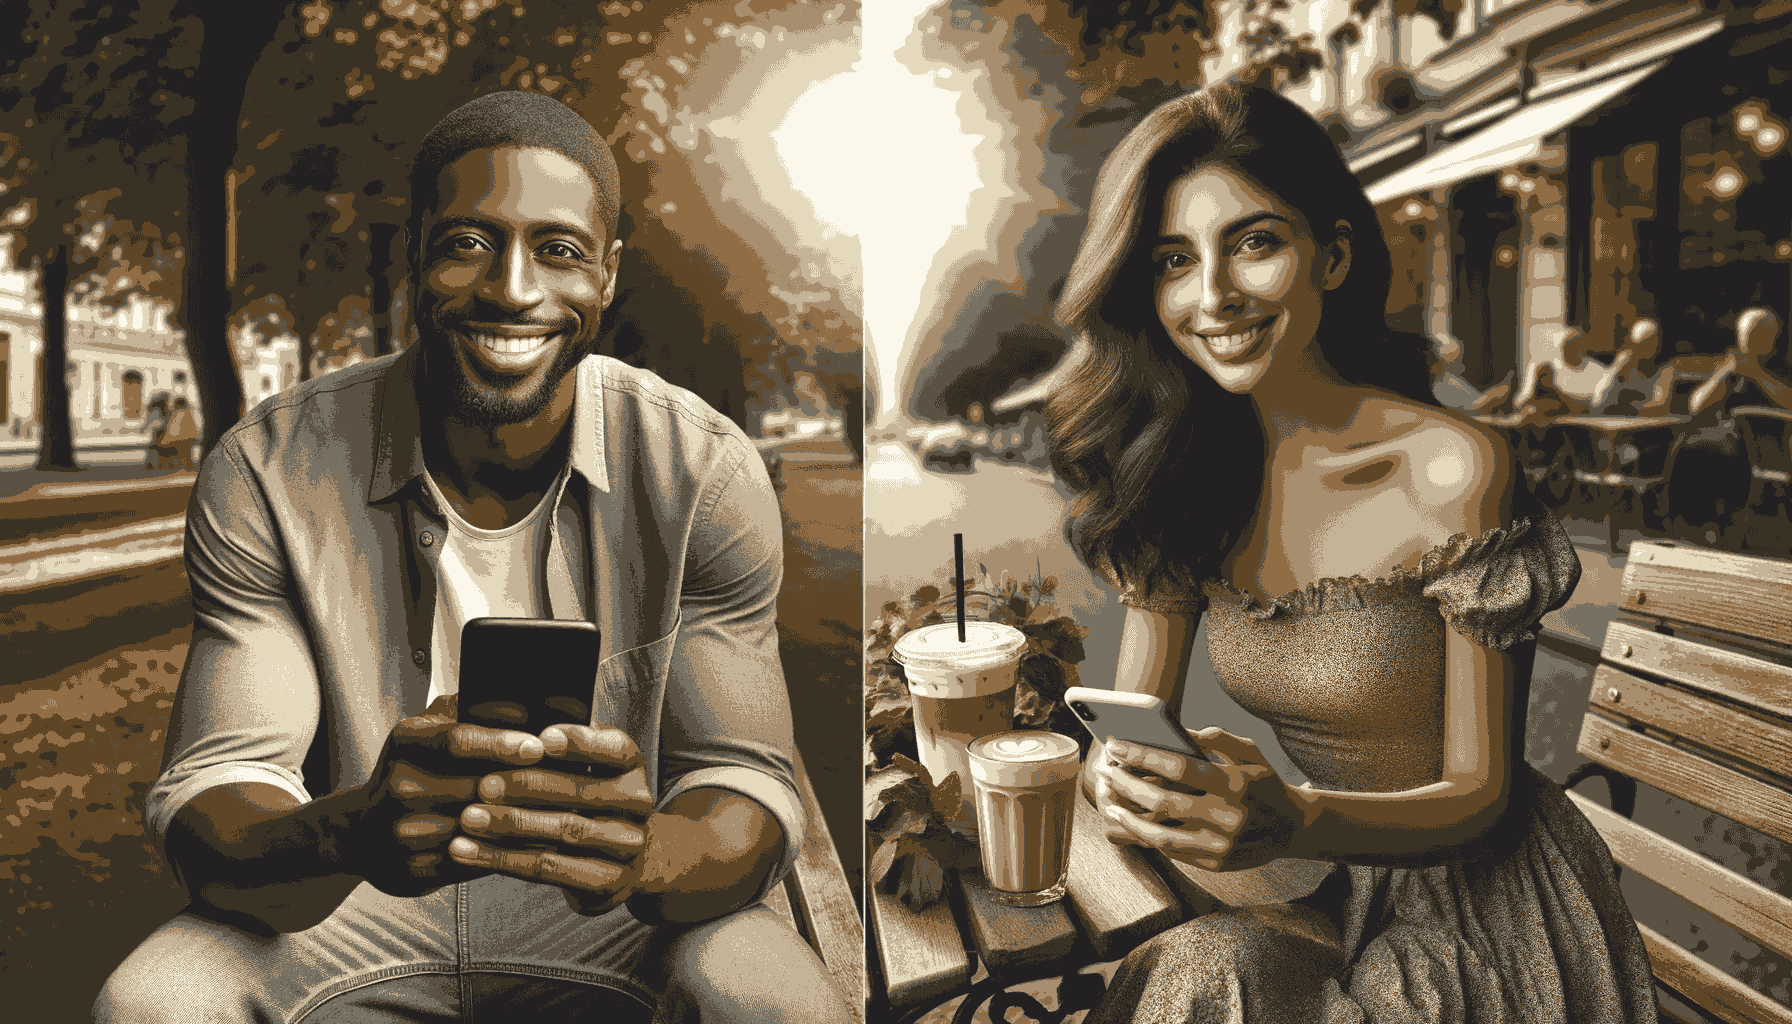 A man and a woman separate but visible in the same frame each with a smartphone in their hands. They are both